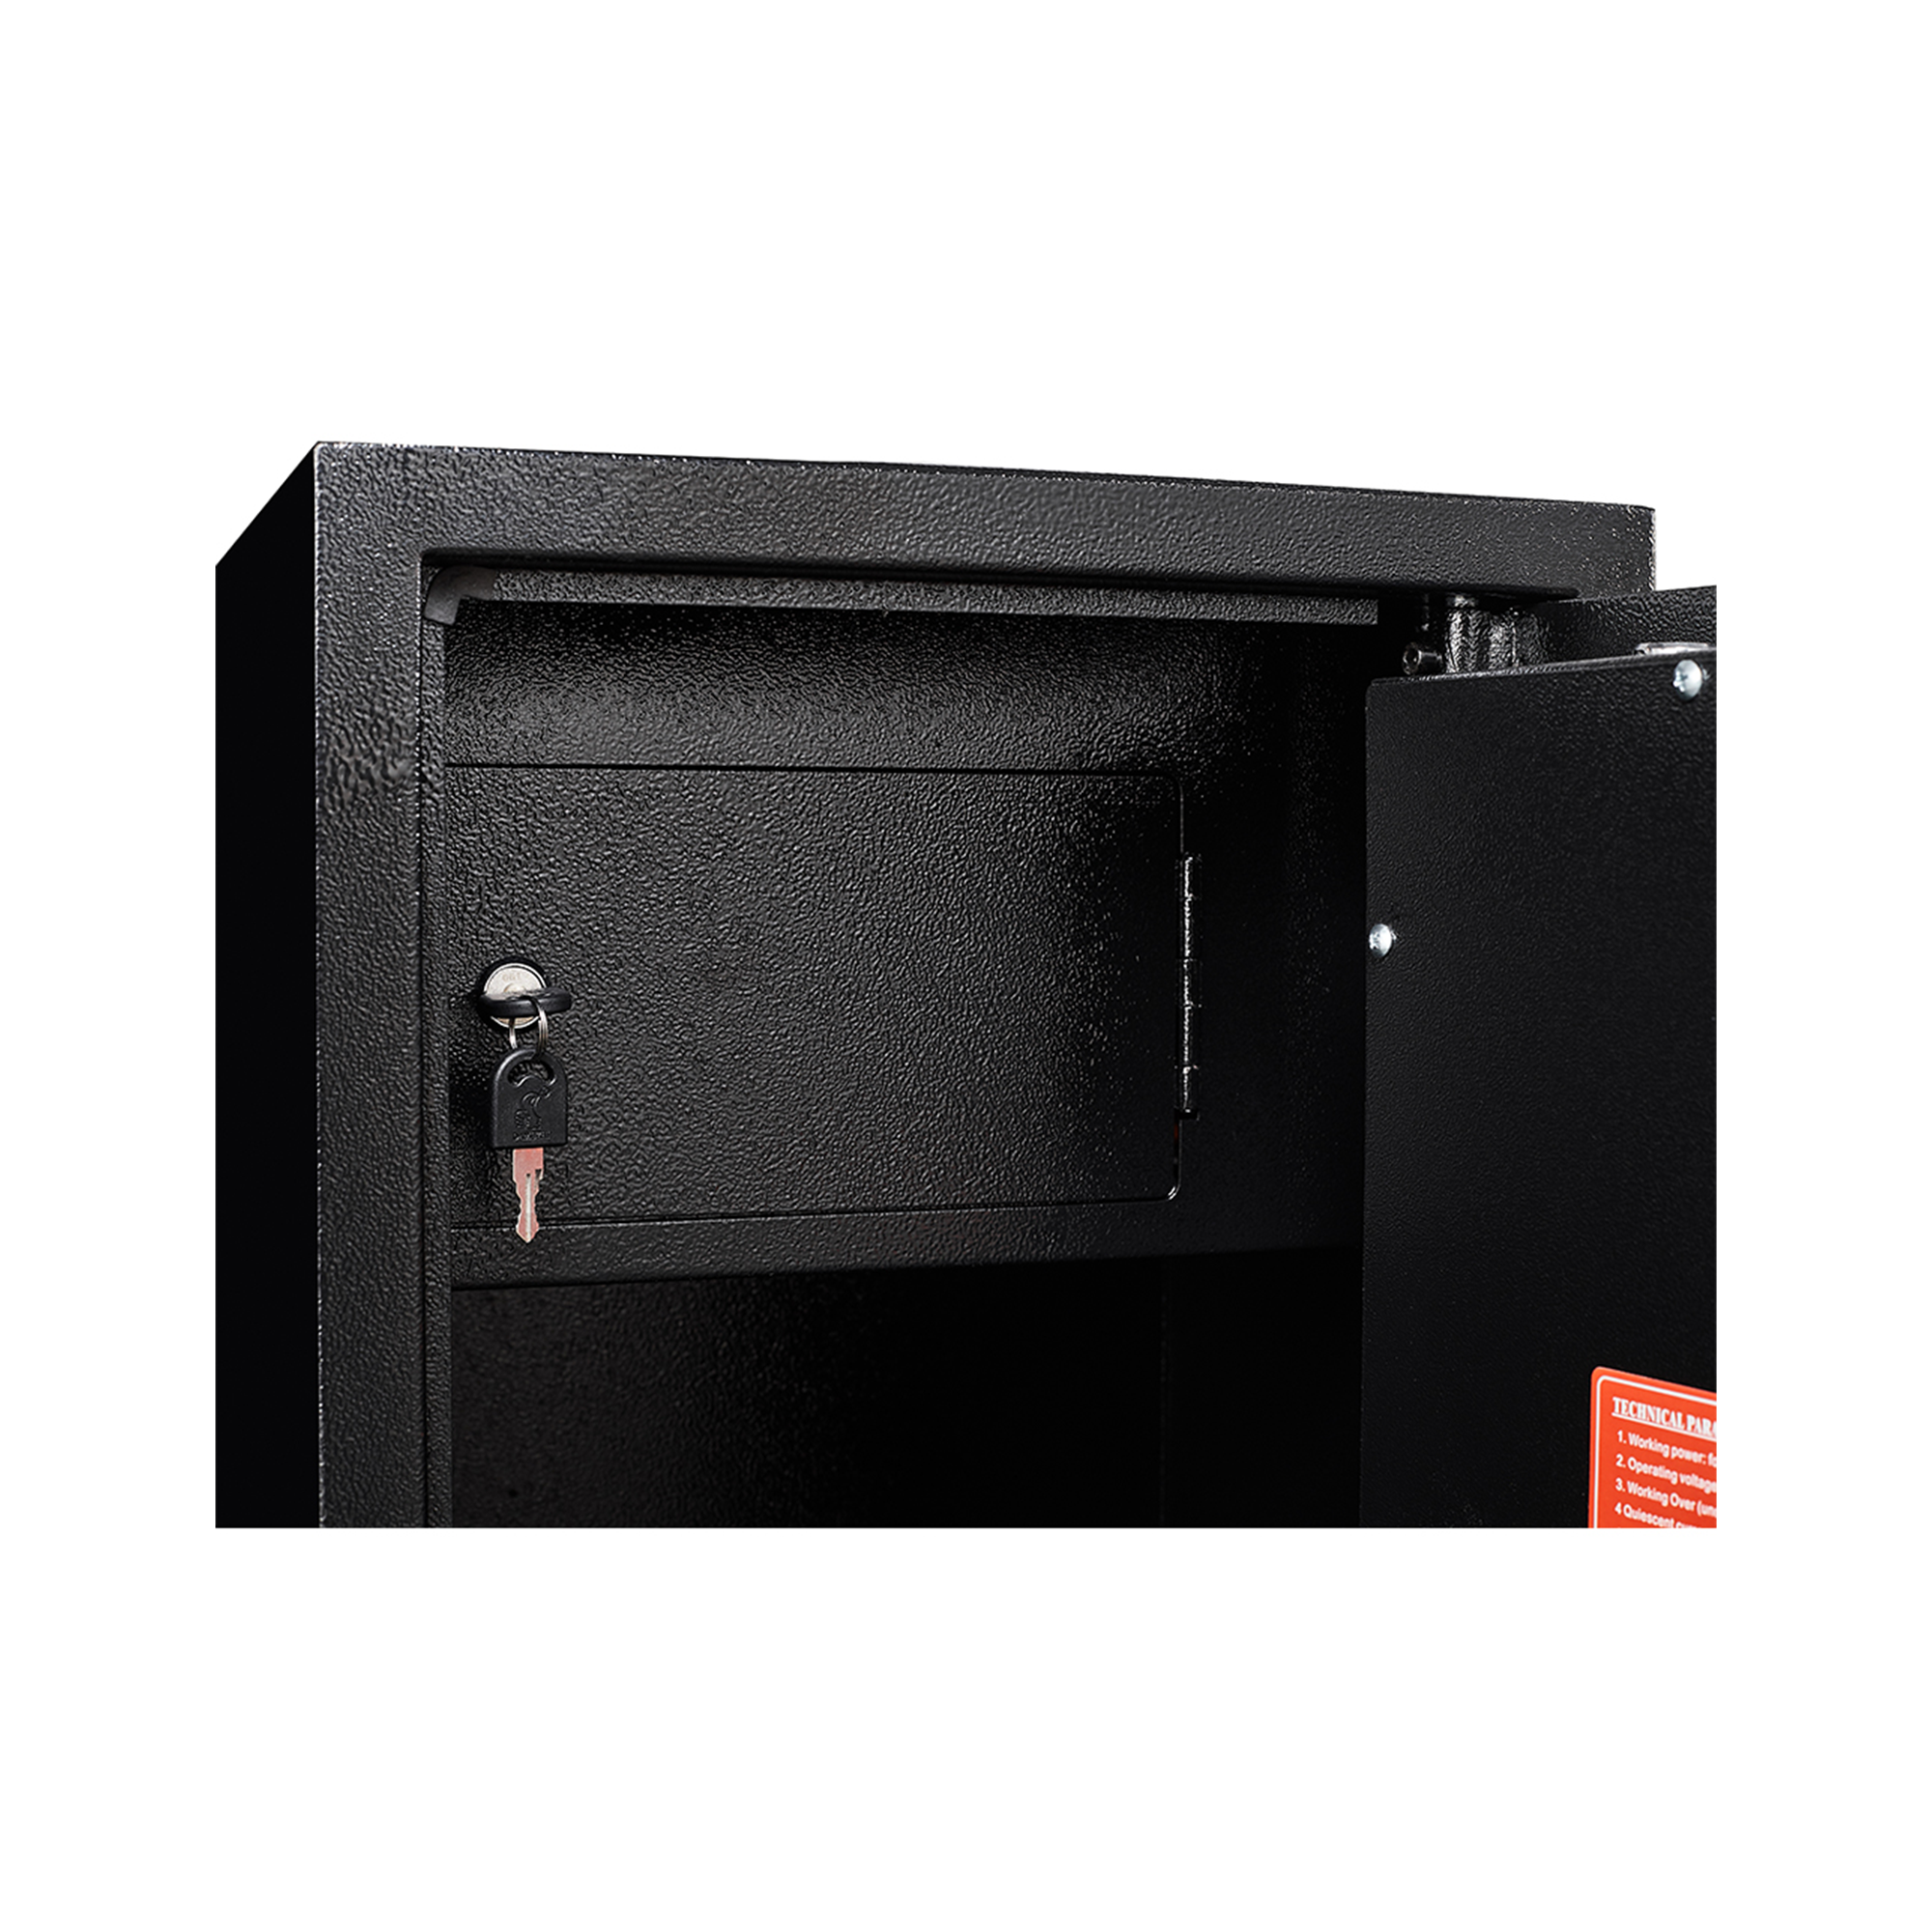 3 5 Gun Safes for Home Rifles and Pistols with Inner black-steel